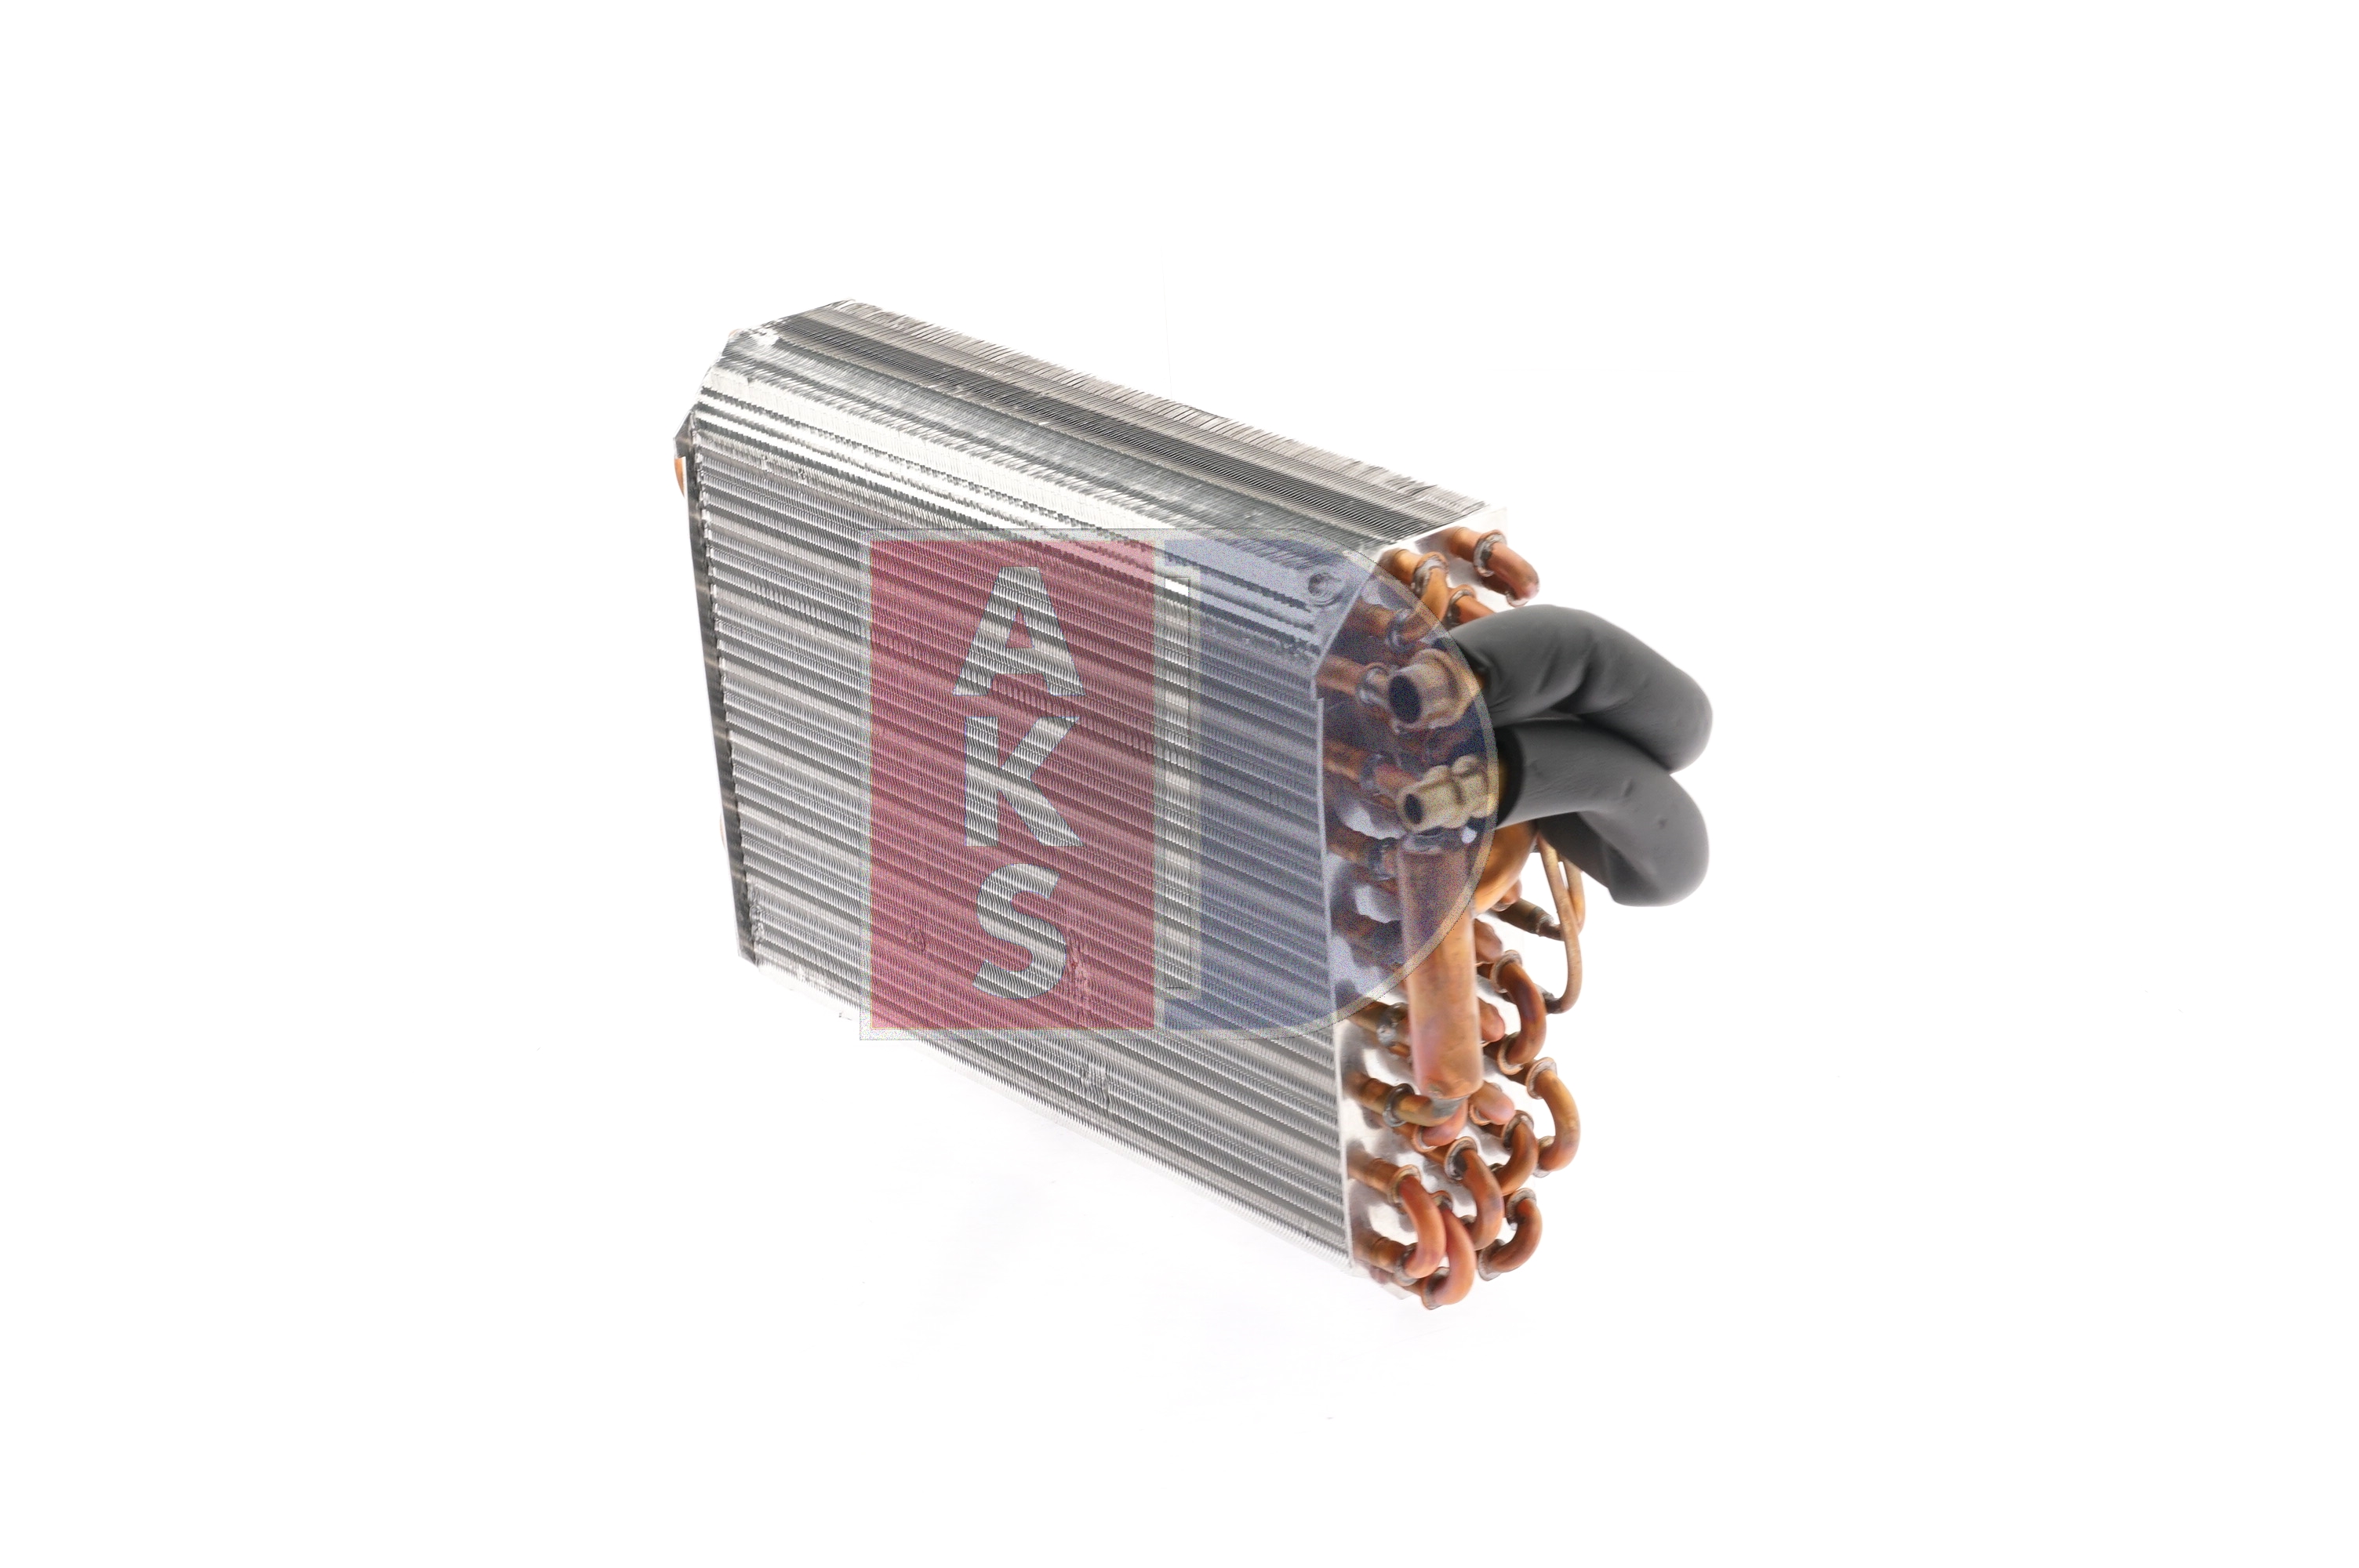 Mercedes-Benz Air conditioning evaporator AKS DASIS 820250N at a good price